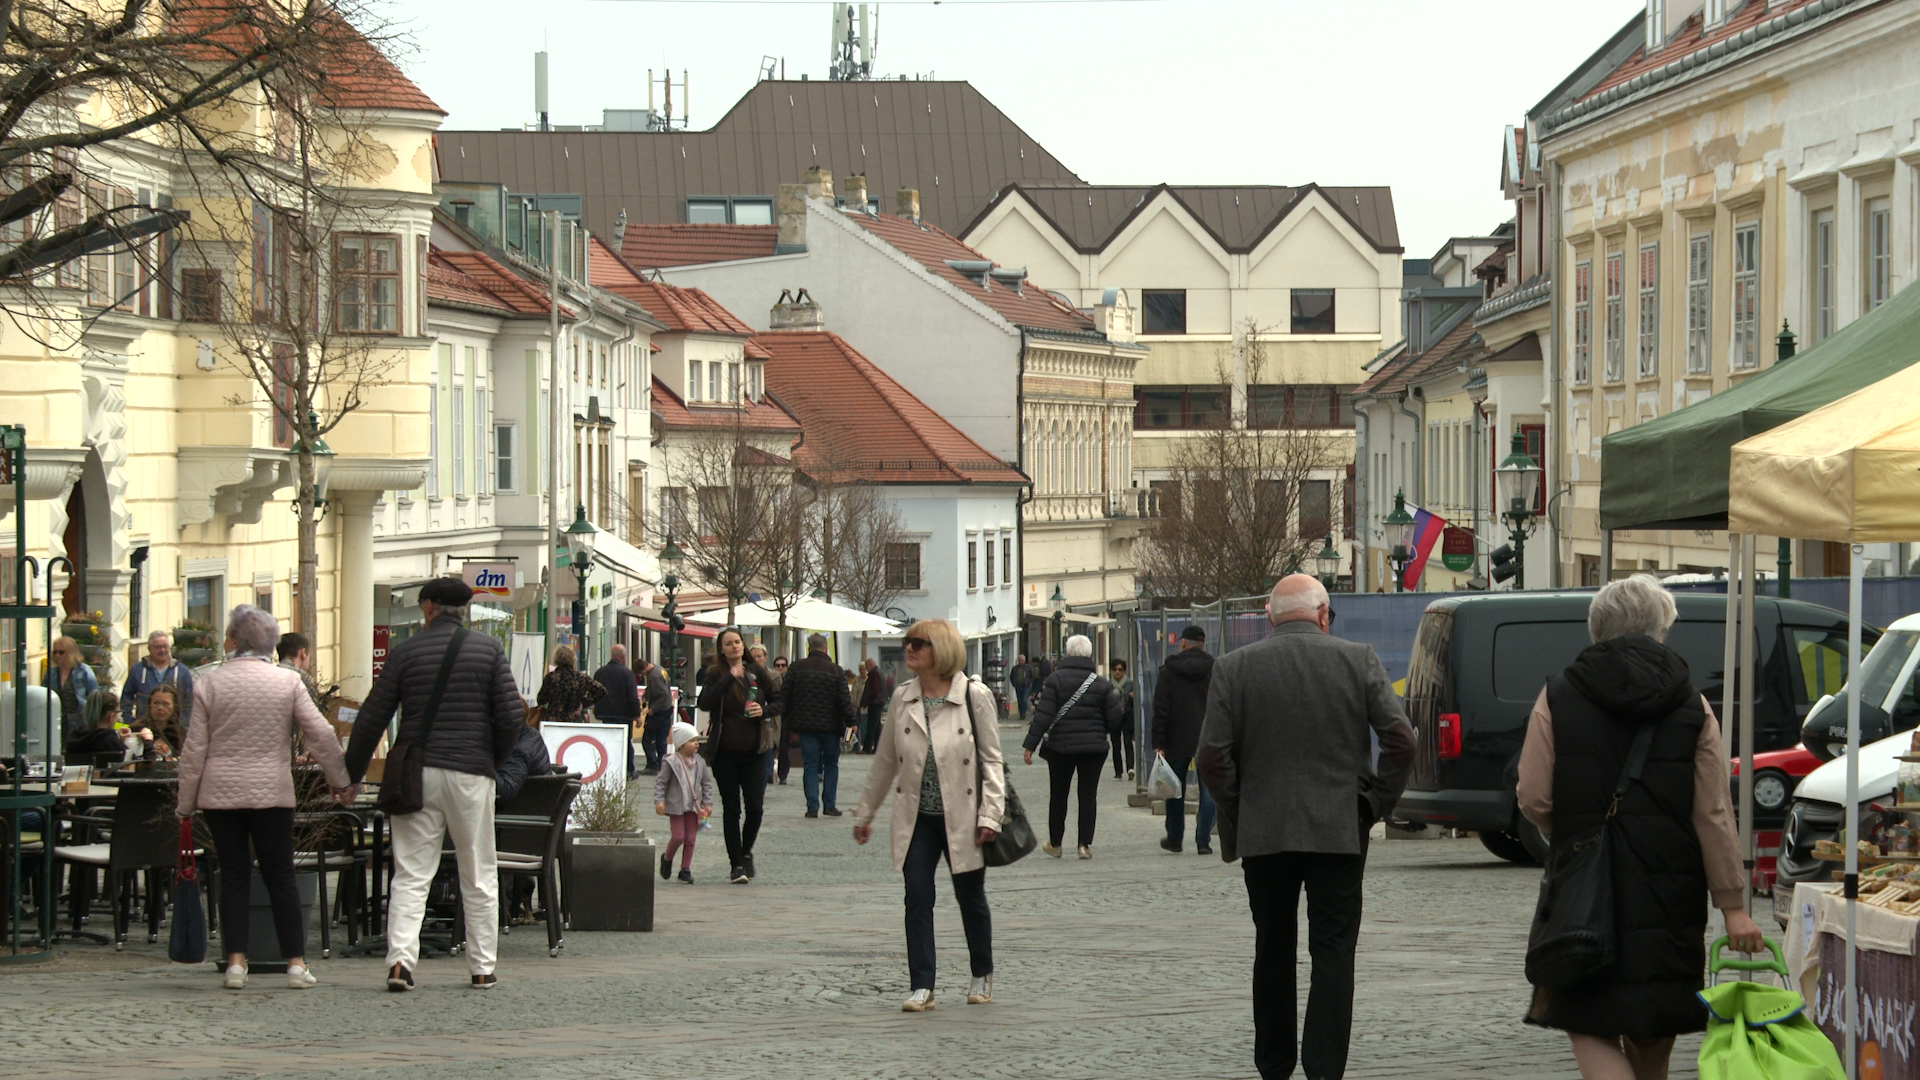 Now the small town close to Hungary's border is bustling especially during market days. /MediaWorks/CGTN